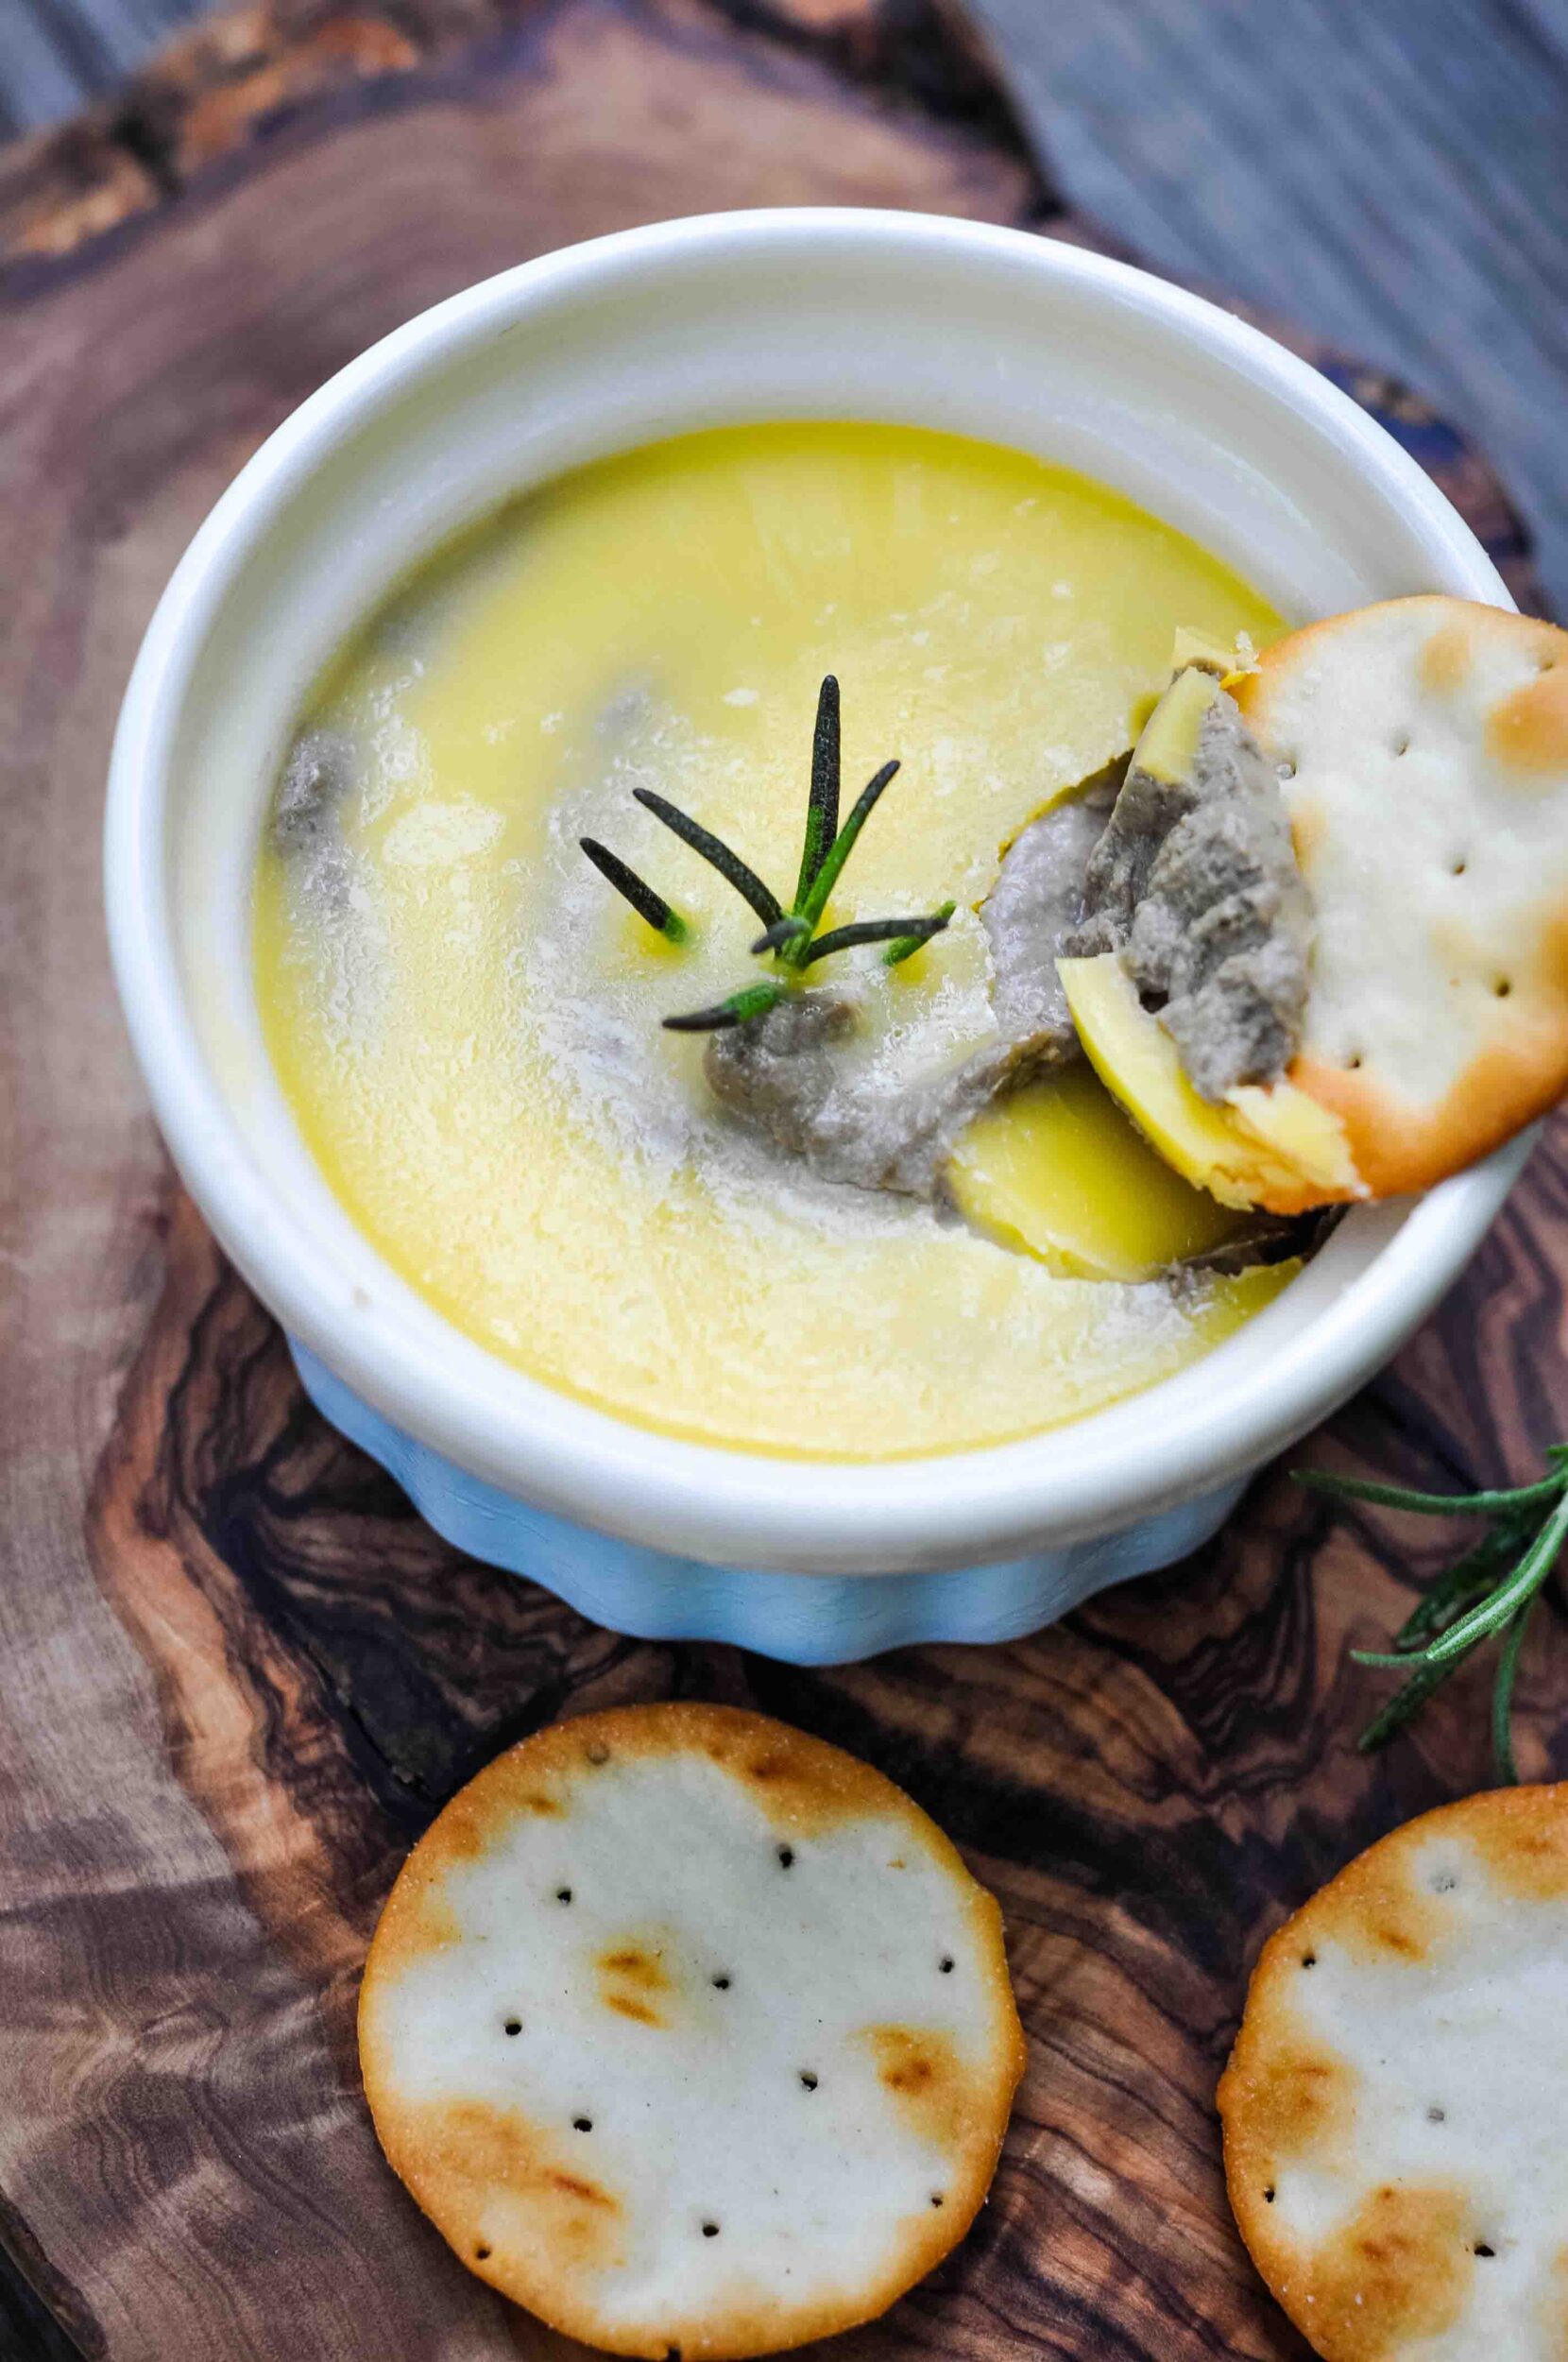 Chicken liver pate in a small bowl with crackers.